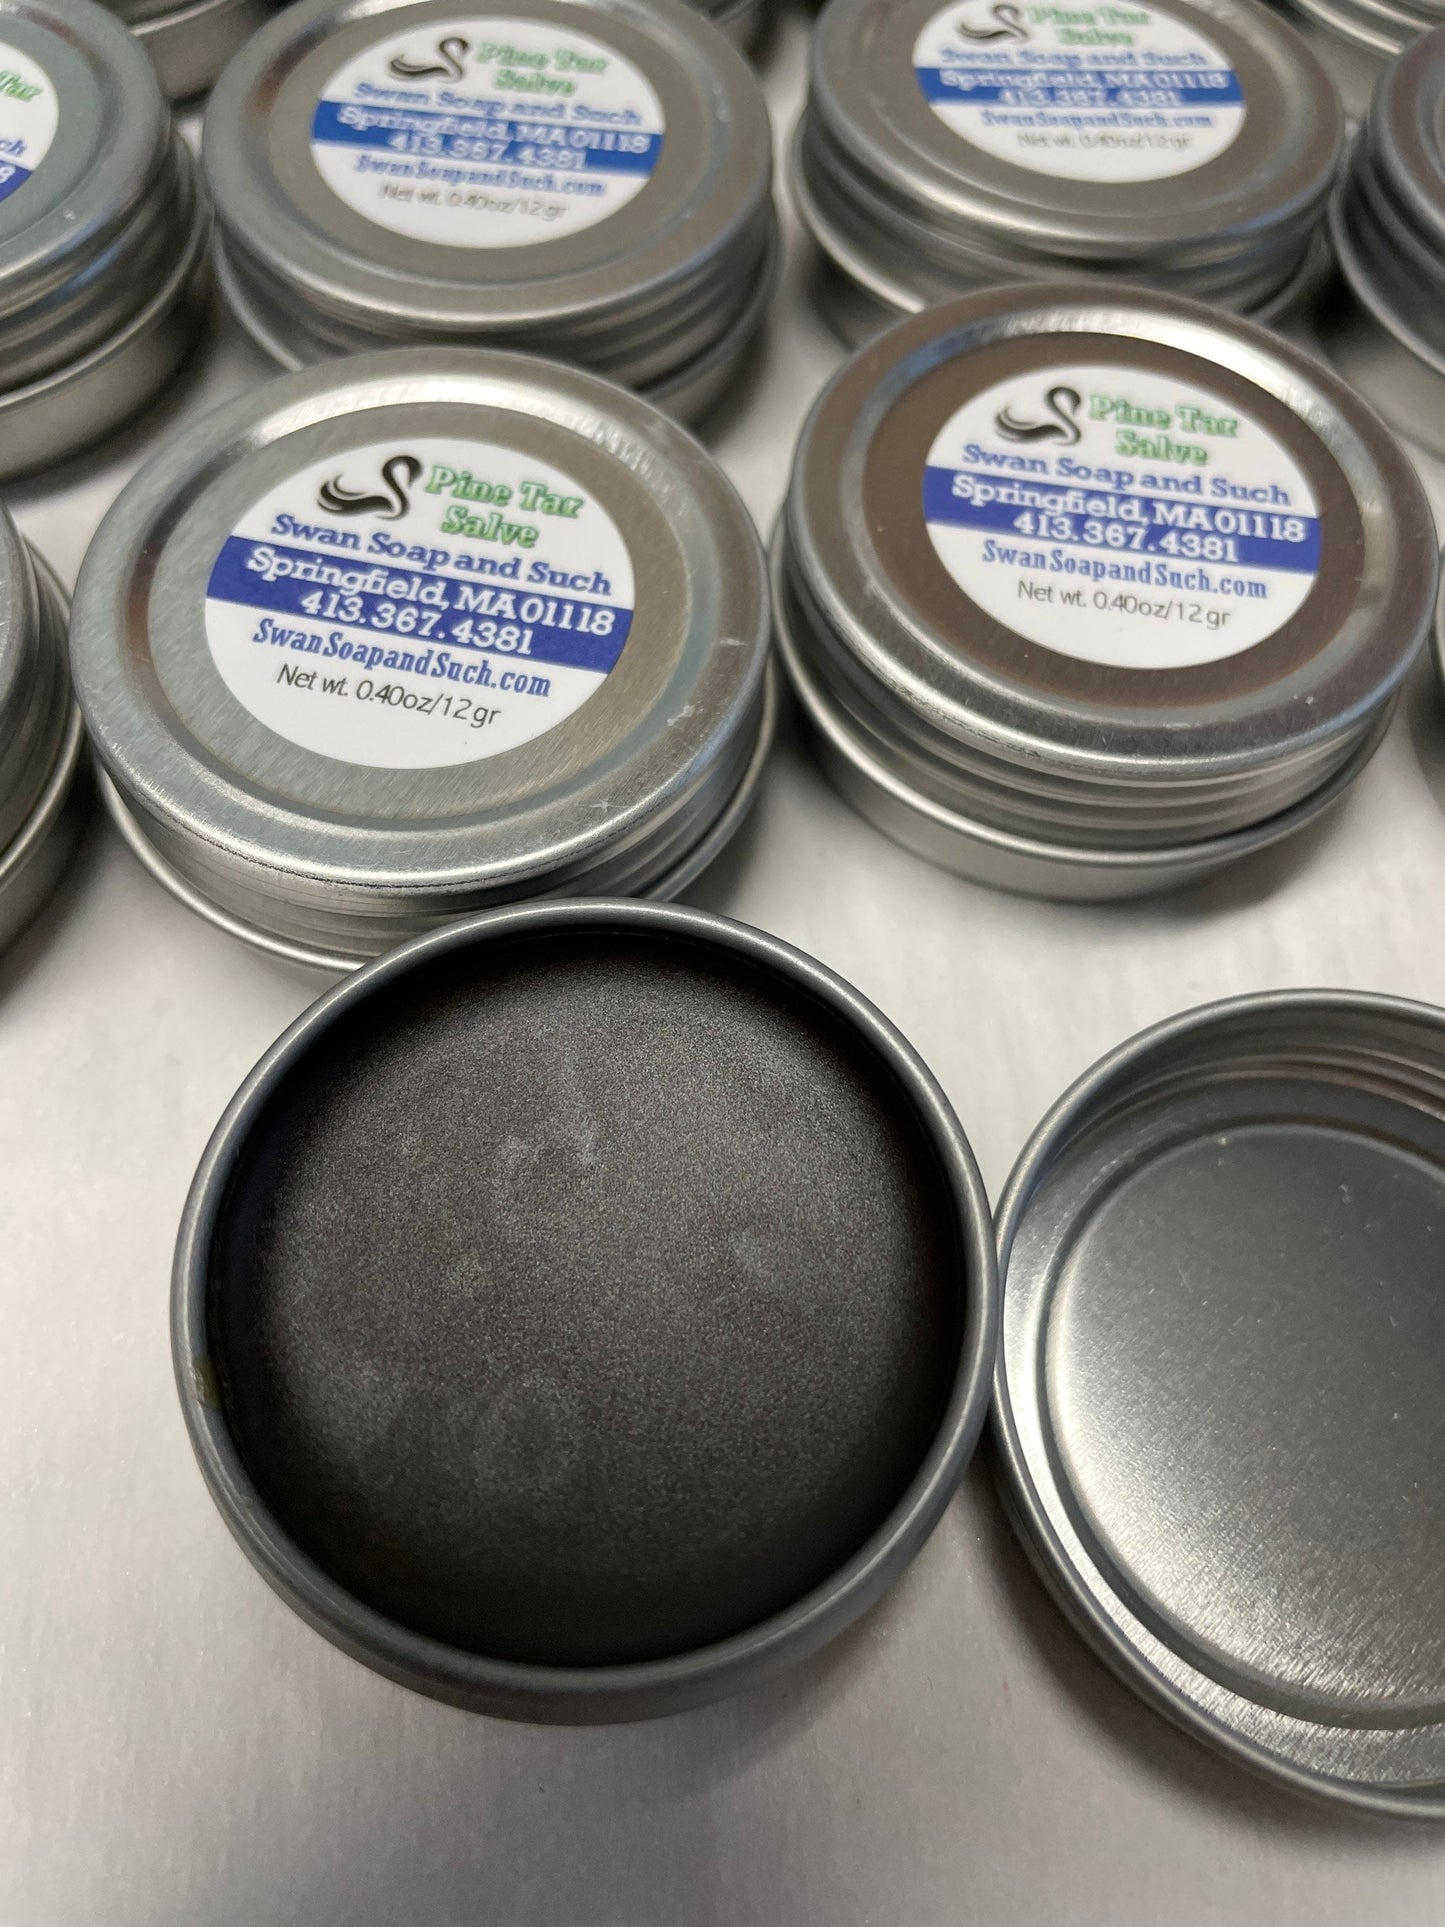 A photo showing a container of Pine Tar Salve